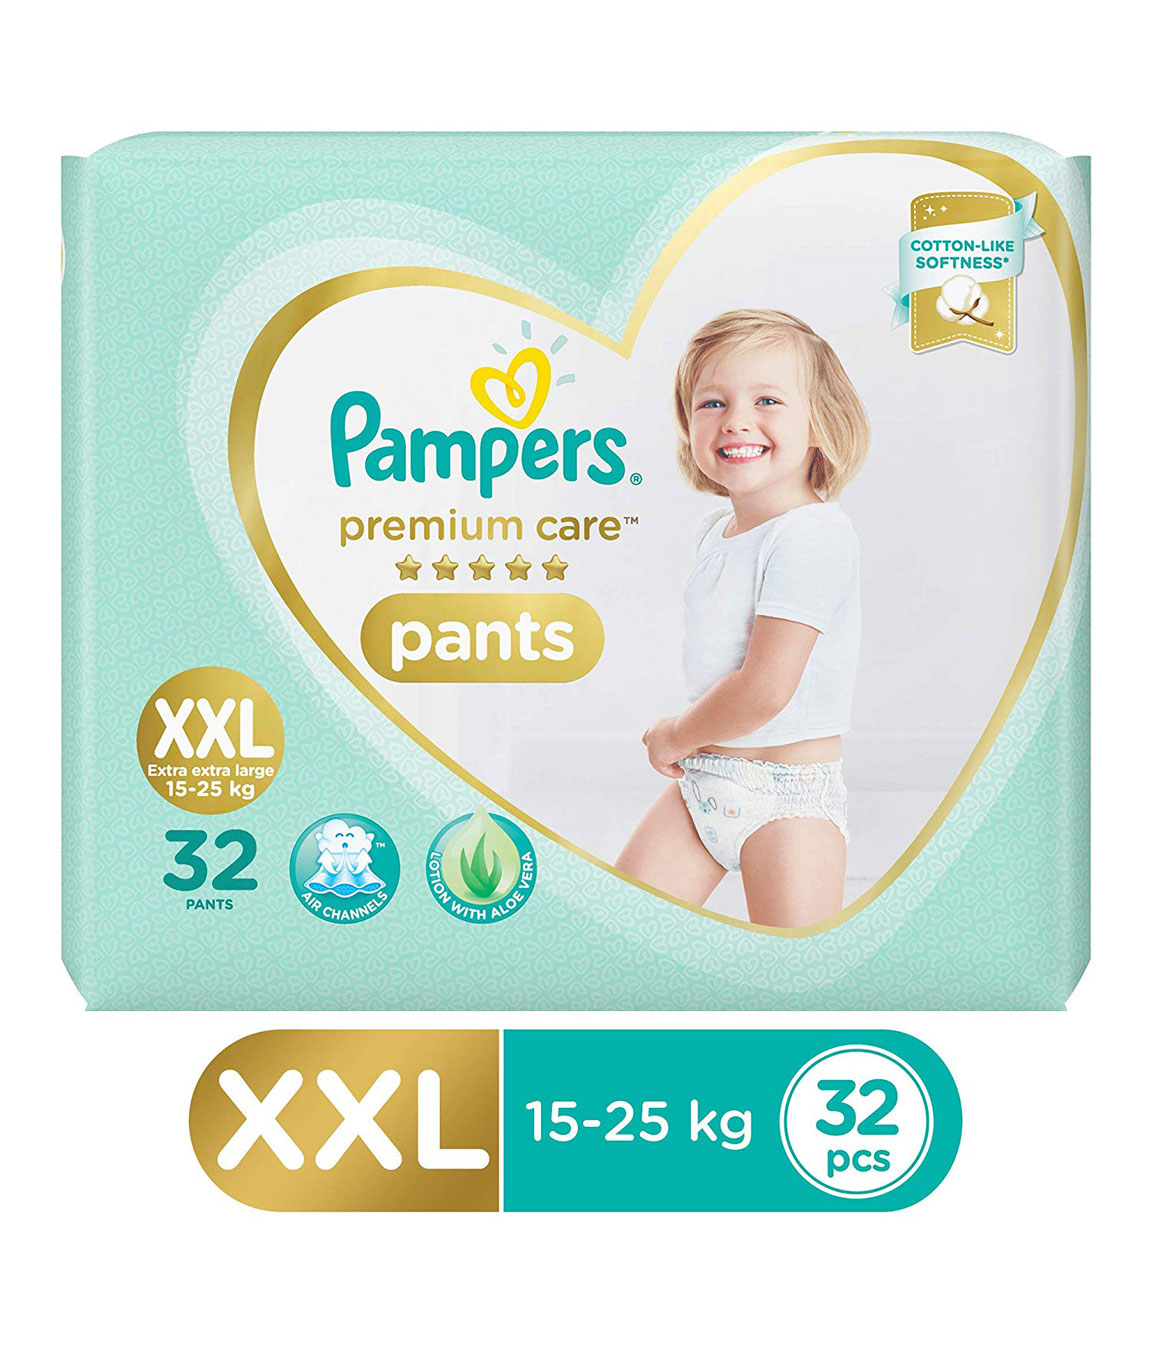 Buy Pampers Premium Care Pants Diapers, Medium, 54 Count&Pampers Premium  Care Pants Diapers, XL, 36 Count Online at Low Prices in India - Amazon.in